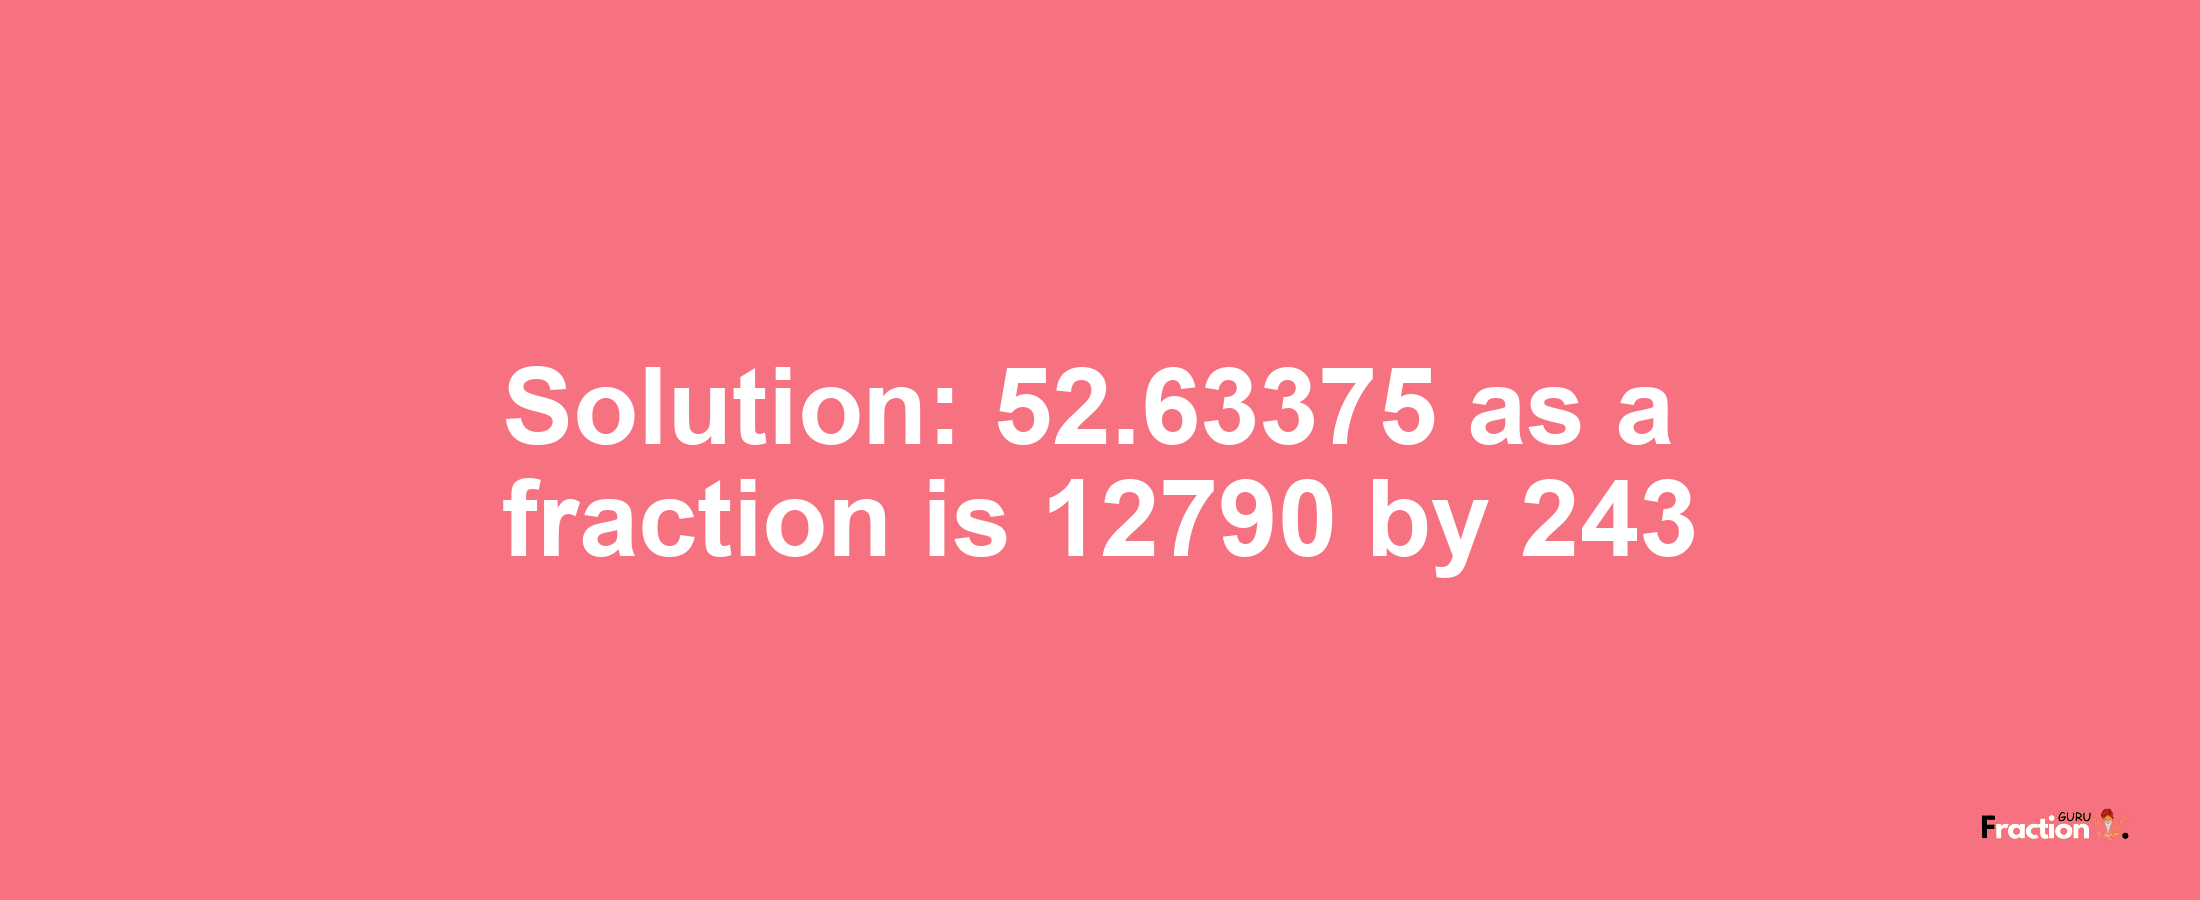 Solution:52.63375 as a fraction is 12790/243